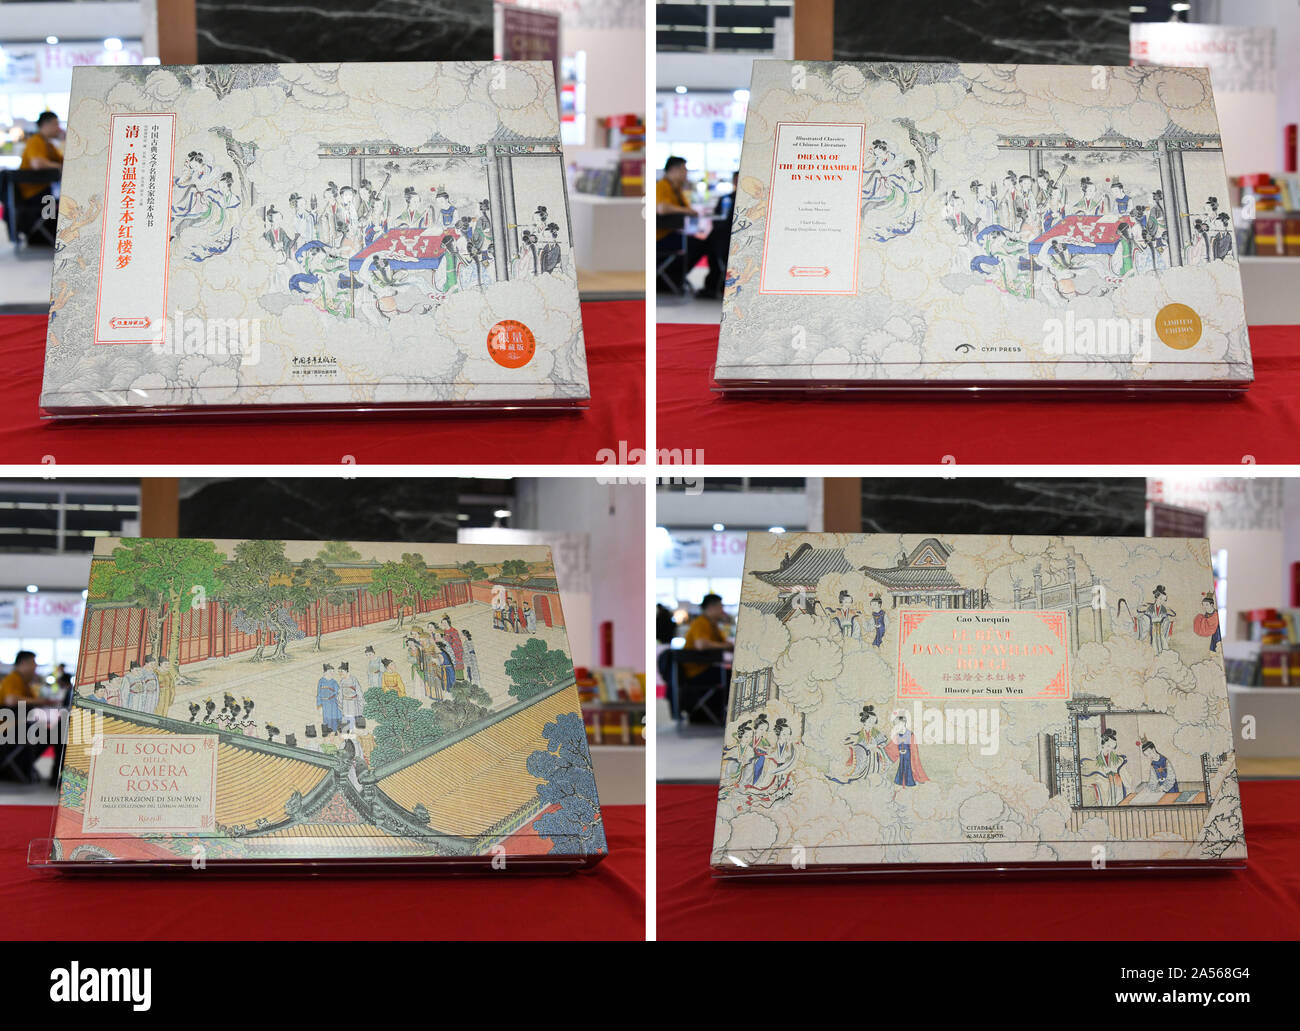 (191018) -- FRANKFURT, Oct. 18, 2019 (Xinhua) -- Combo photo taken on Oct. 17, 2019 shows limited editions in Chinese, English, French and Italian (clockwise) of 'Illustrated Classics of Chinese Literature: Dream of the Red Chamber by Sun Wen' at Frankfurt Book Fair in Frankfurt, Germany. Modern prints of an ancient illustrated version of the Chinese literary classic 'Dream of the Red Chamber' were launched globally Thursday at the annual Frankfurt Book Fair in multilingual limited editions.   'Dream of the Red Chamber,' written by Cao Xueqin in the mid-18th century during the Qing Dynasty, is Stock Photo